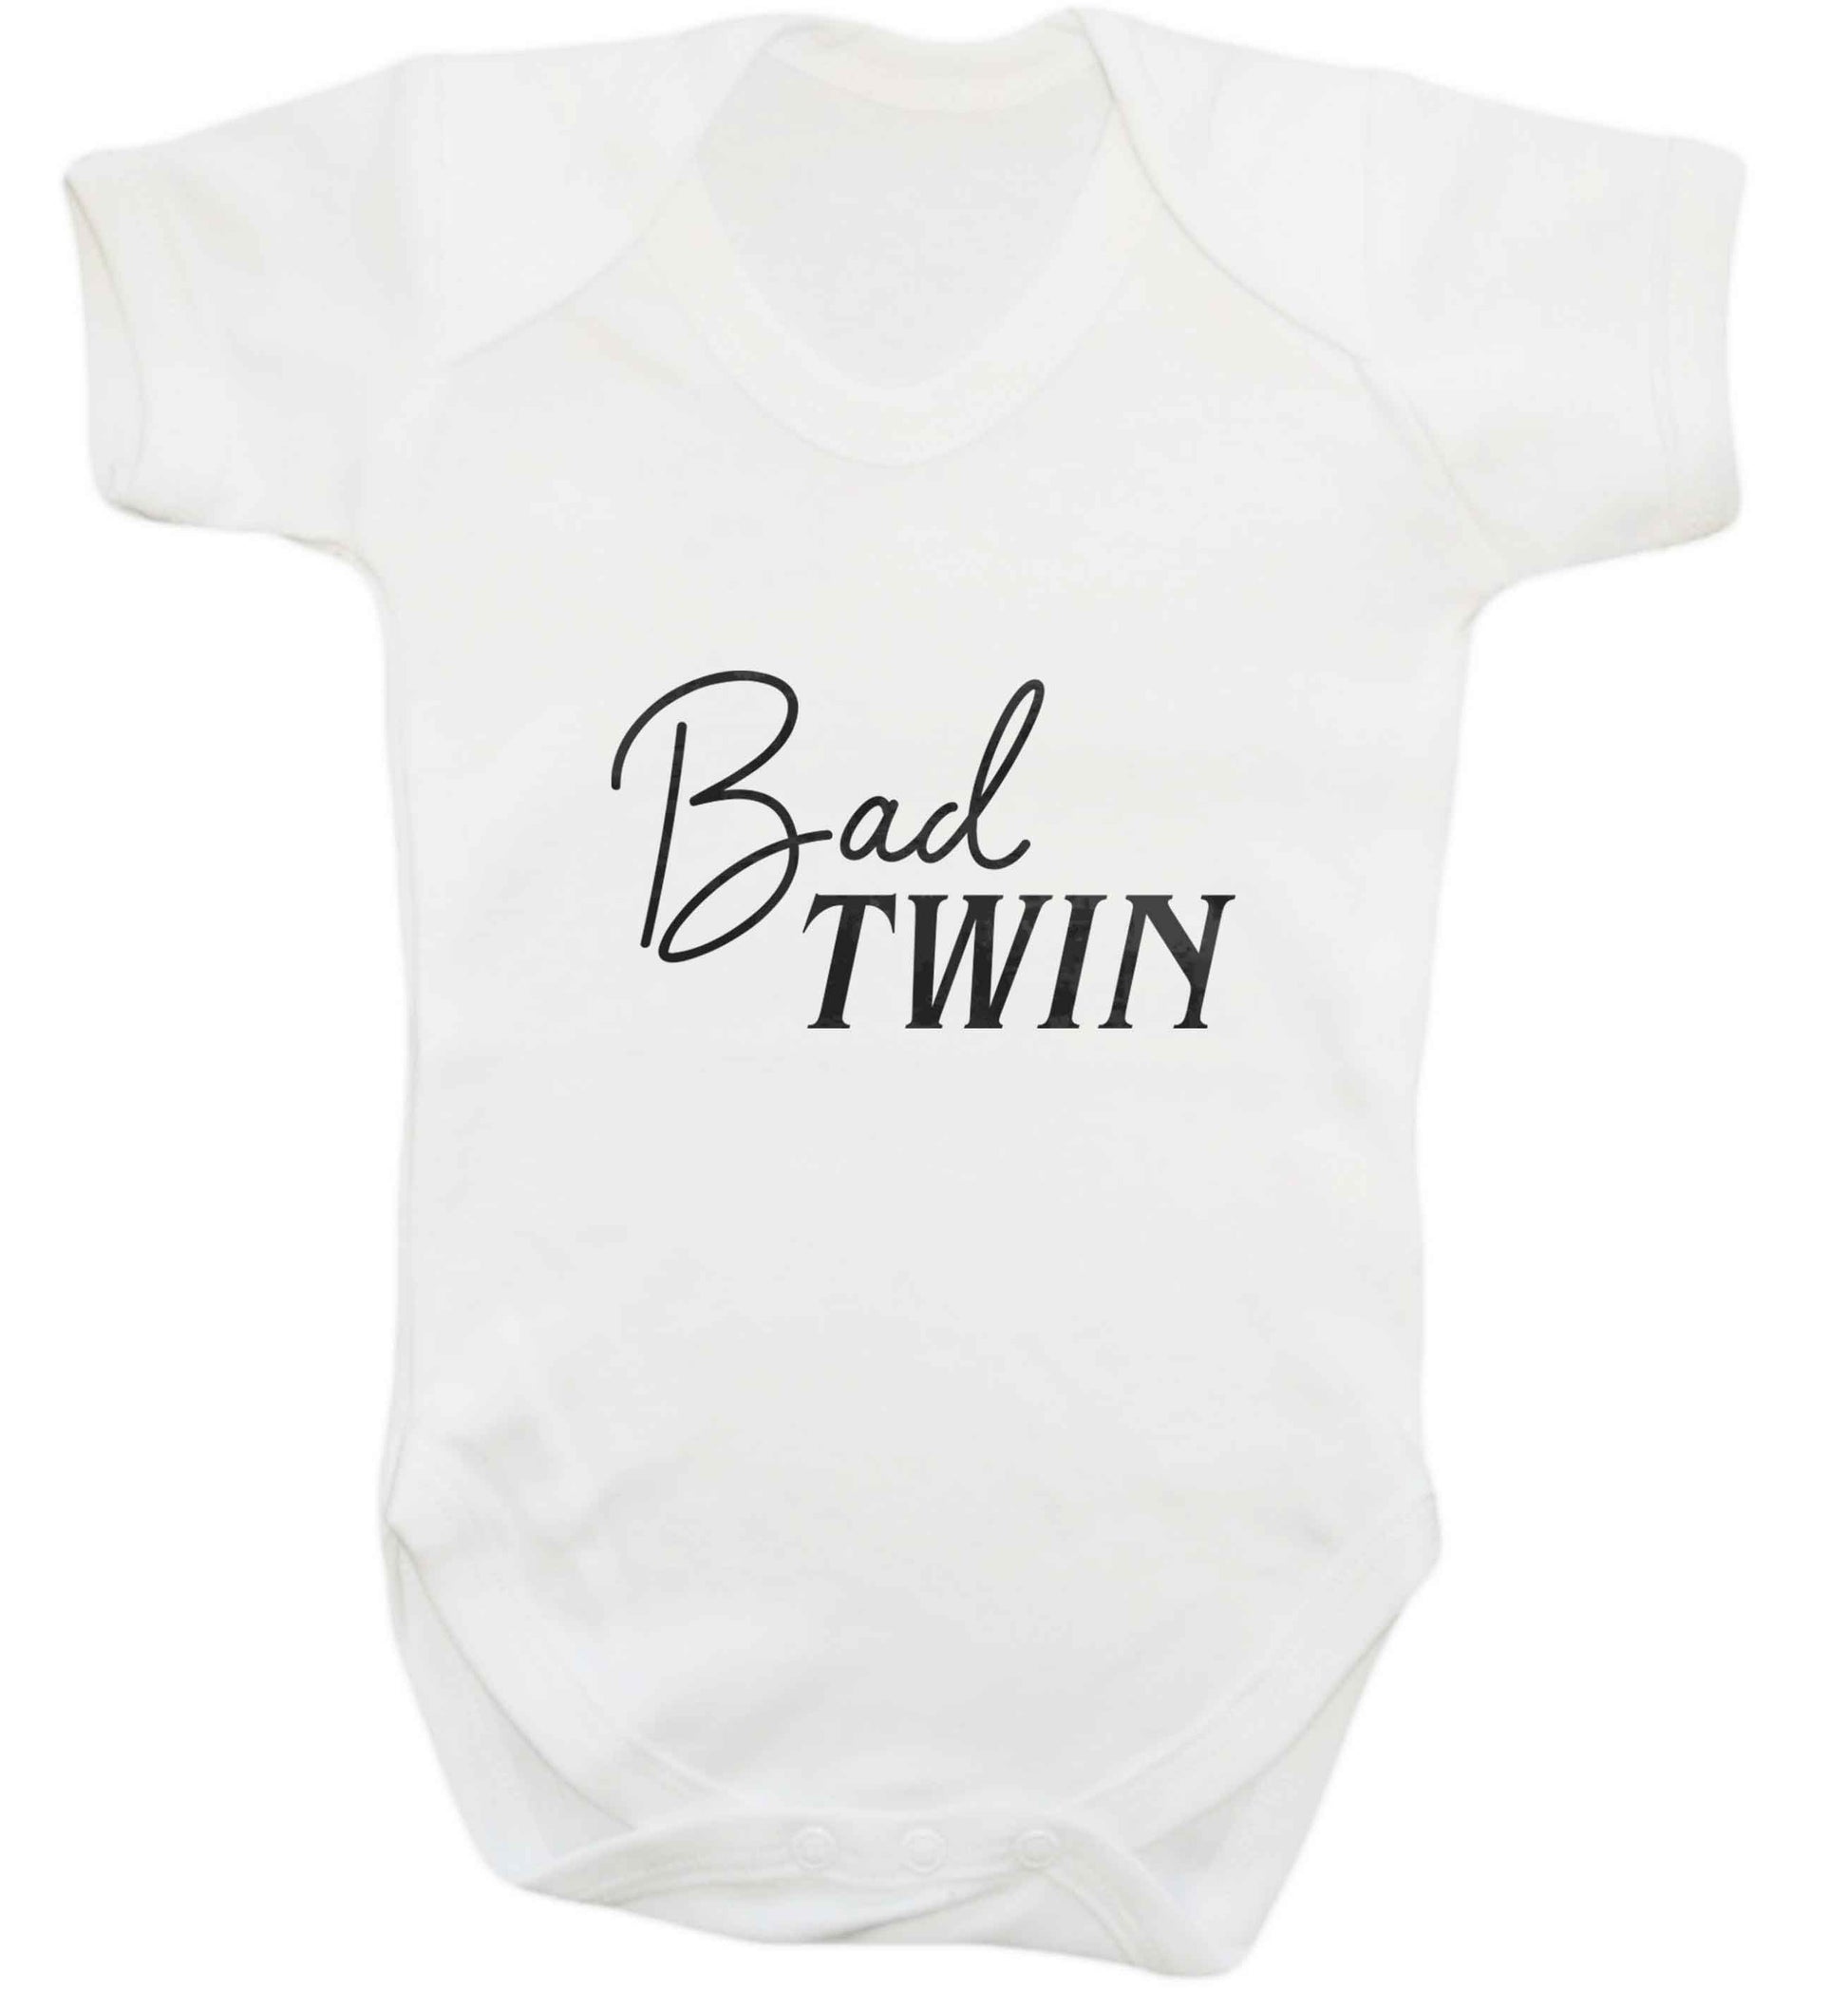 Bad twin baby vest white 18-24 months